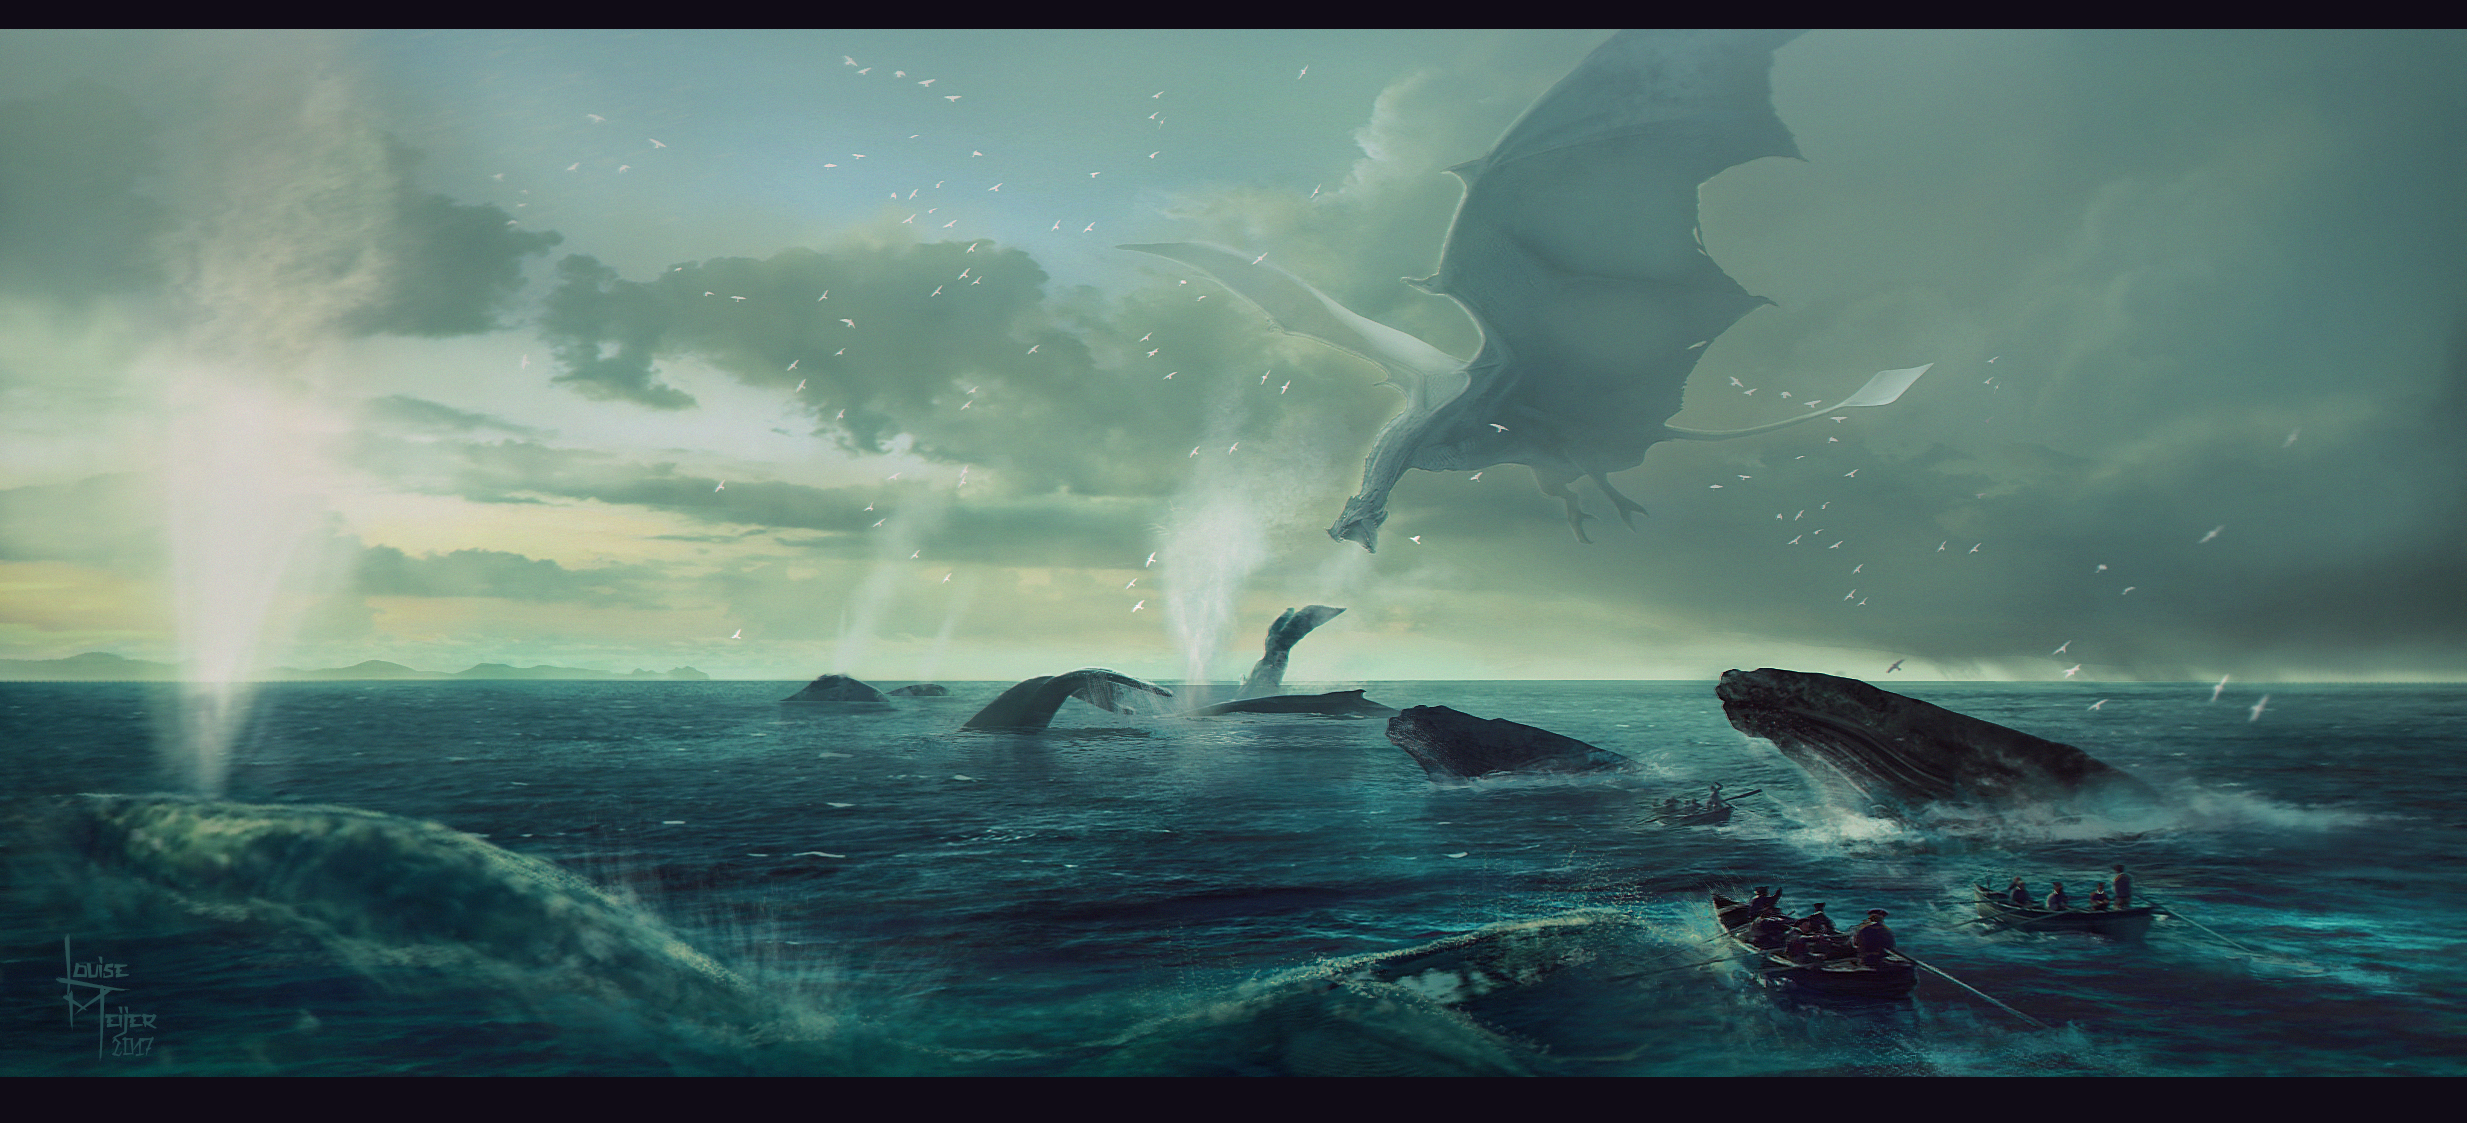 giants_of_the_sea_by_roiuky-db8vvqj.png